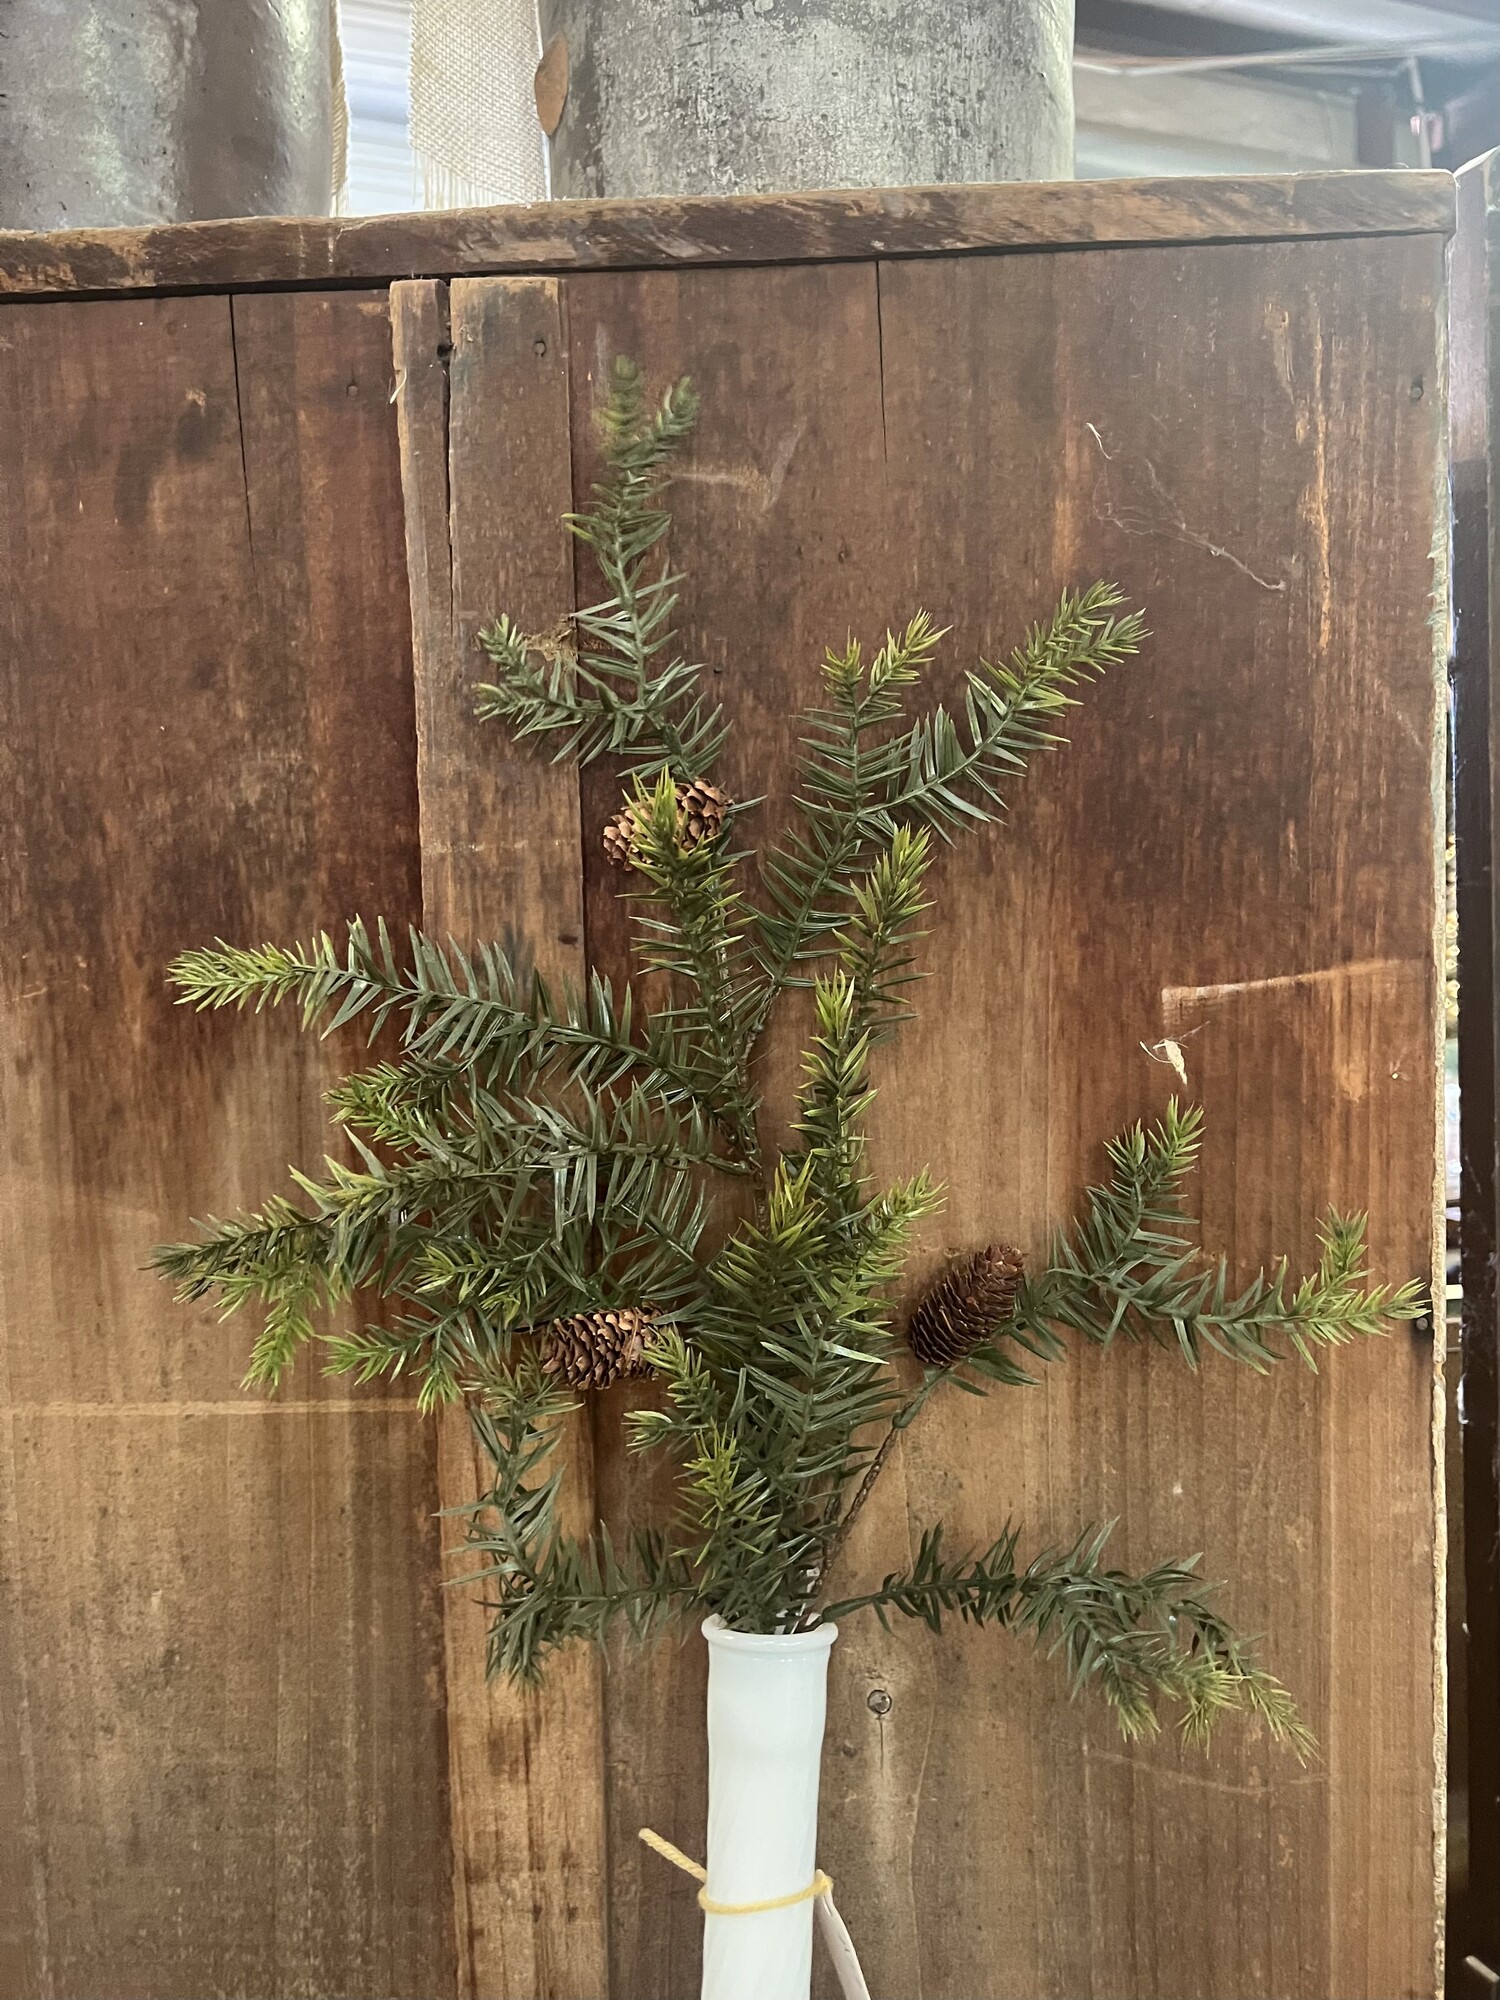 This spruce spray features airy spruce needles with pinecones. Its soft, realistic feel will add the beauty of the outdoors all winter long
Spray measures 22 inches high